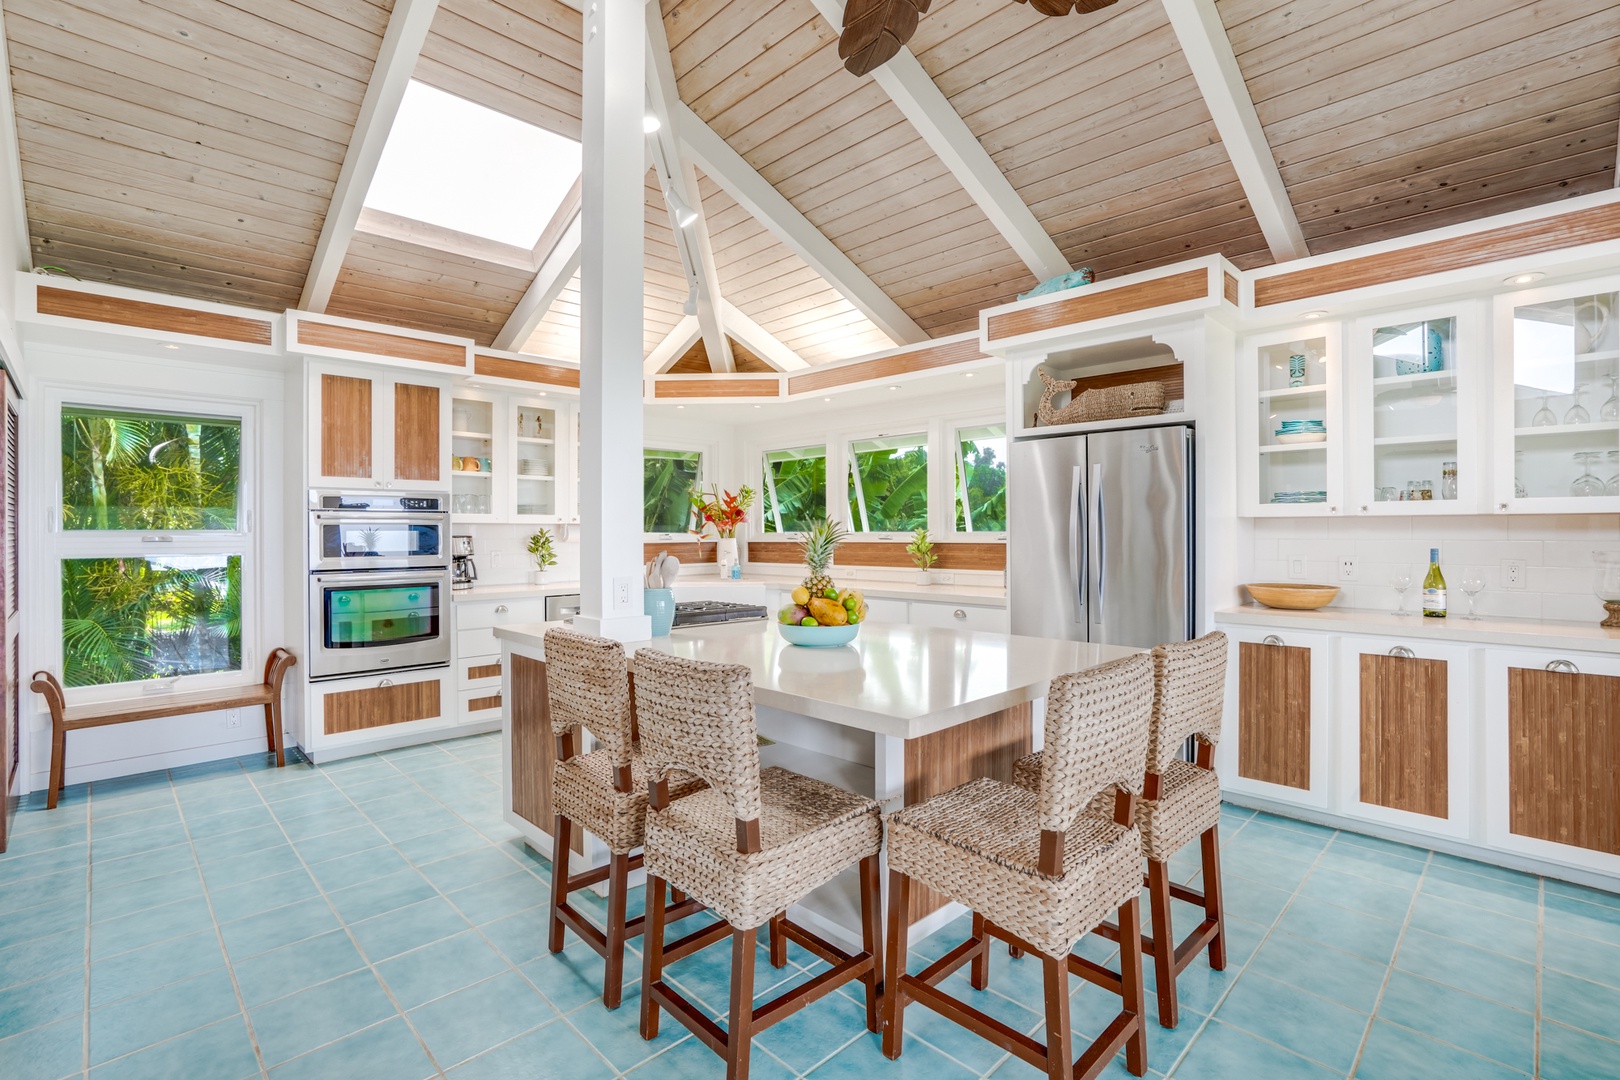 Princeville Vacation Rentals, Wai Lani - Cook, dine, and revel under the expansive vaulted ceilings of our open-concept kitchen and dining area.